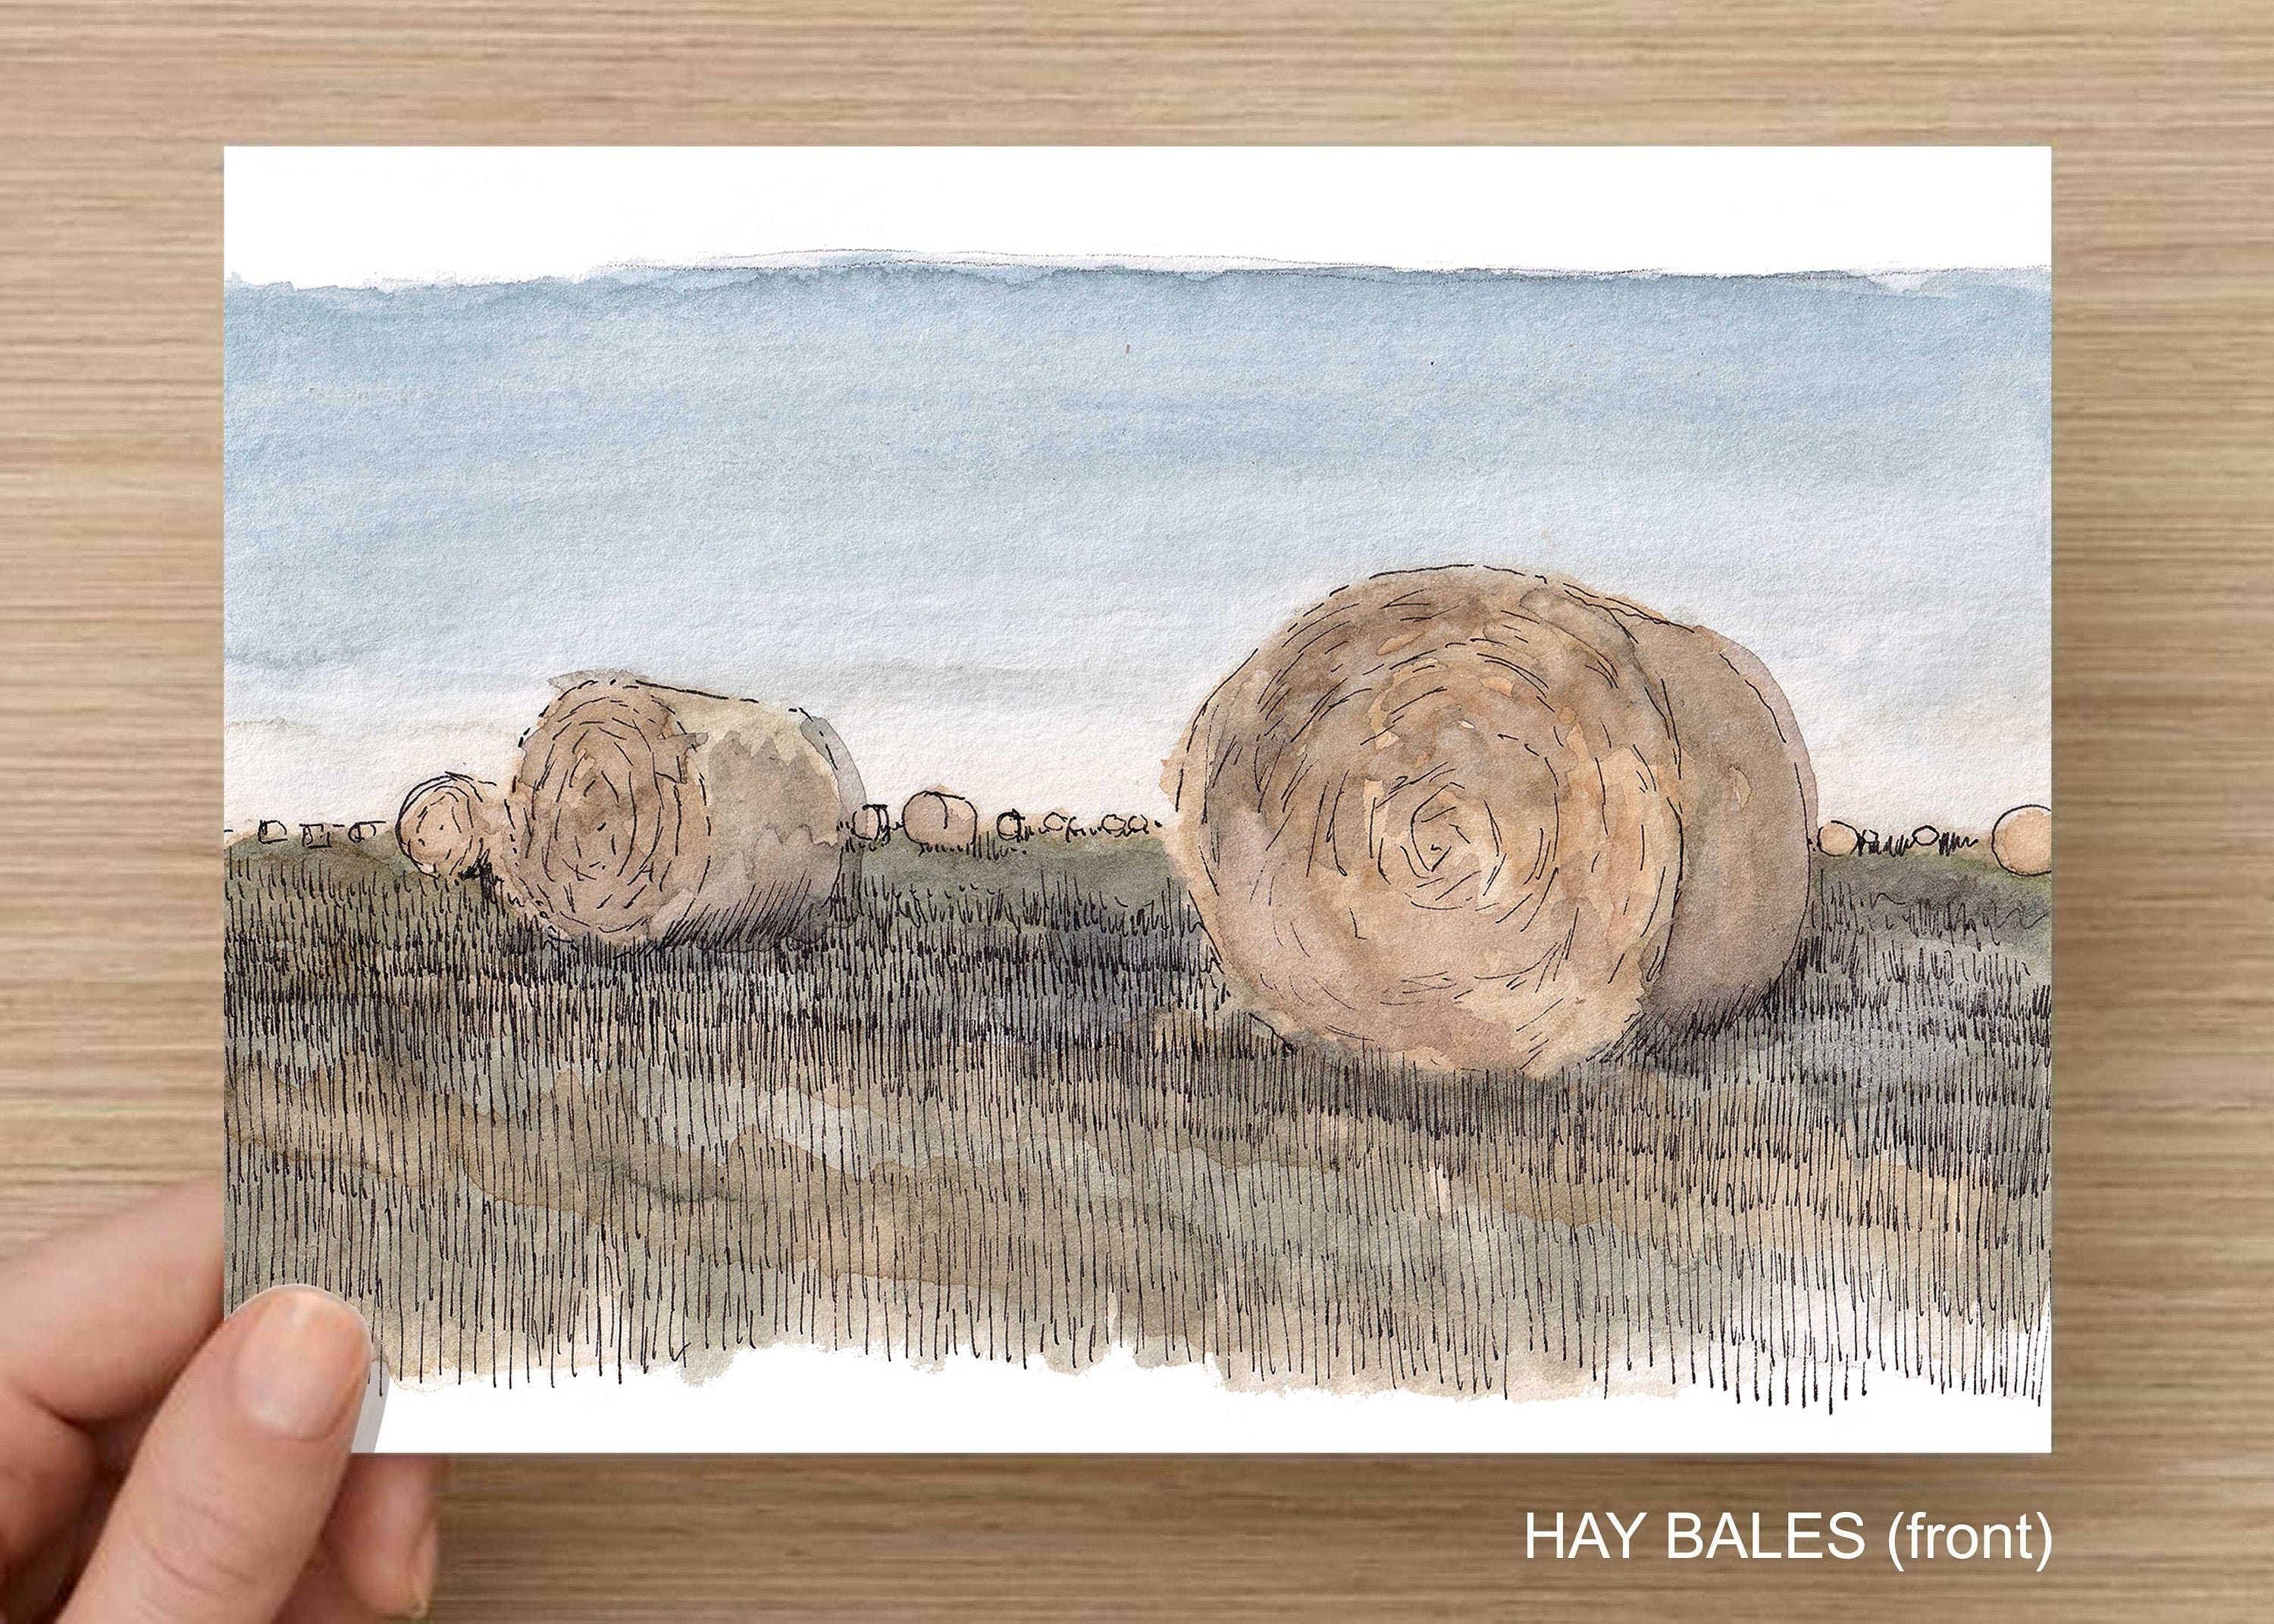 Round Hay Bales Field Ranch Farm Livestock Agriculture Watercolor Landscape Painting Drawing Art Print Sketchbook Drawn There